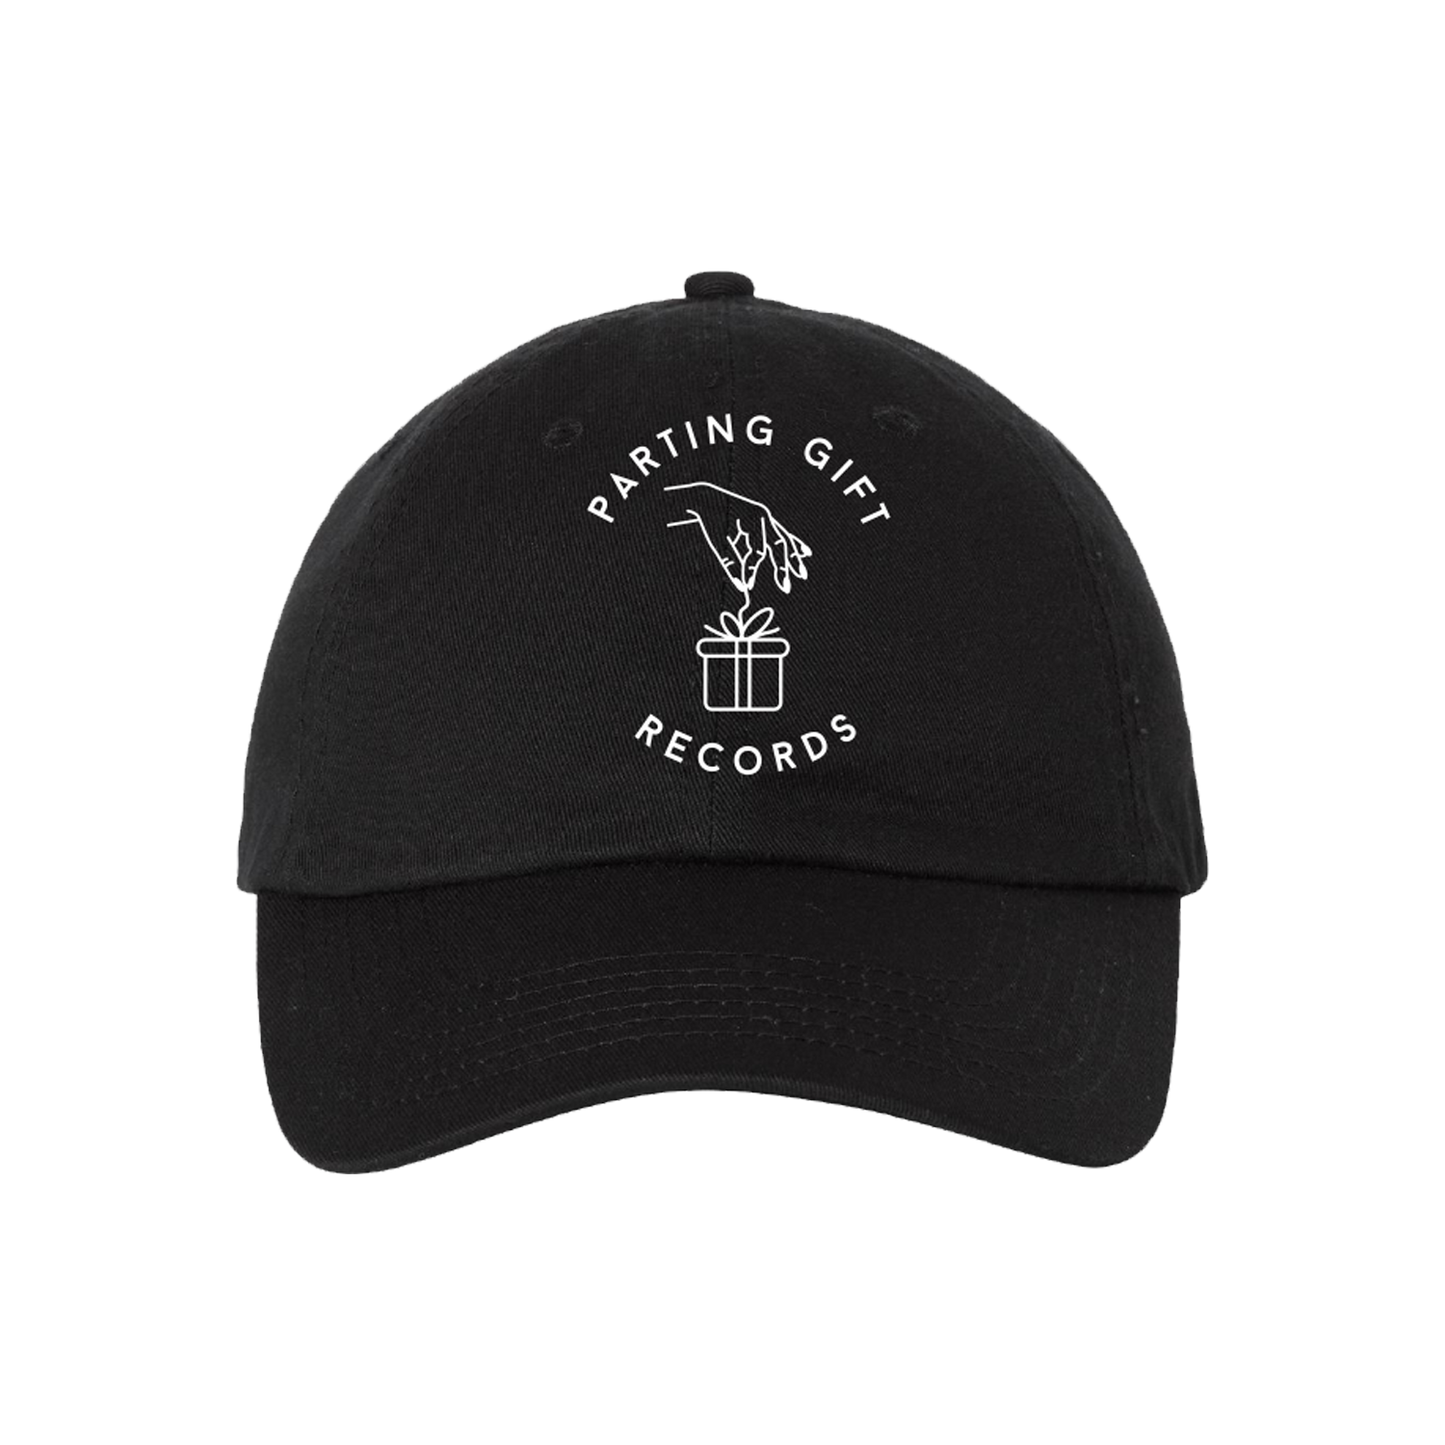 Parting Gift Records "Logo" Hat